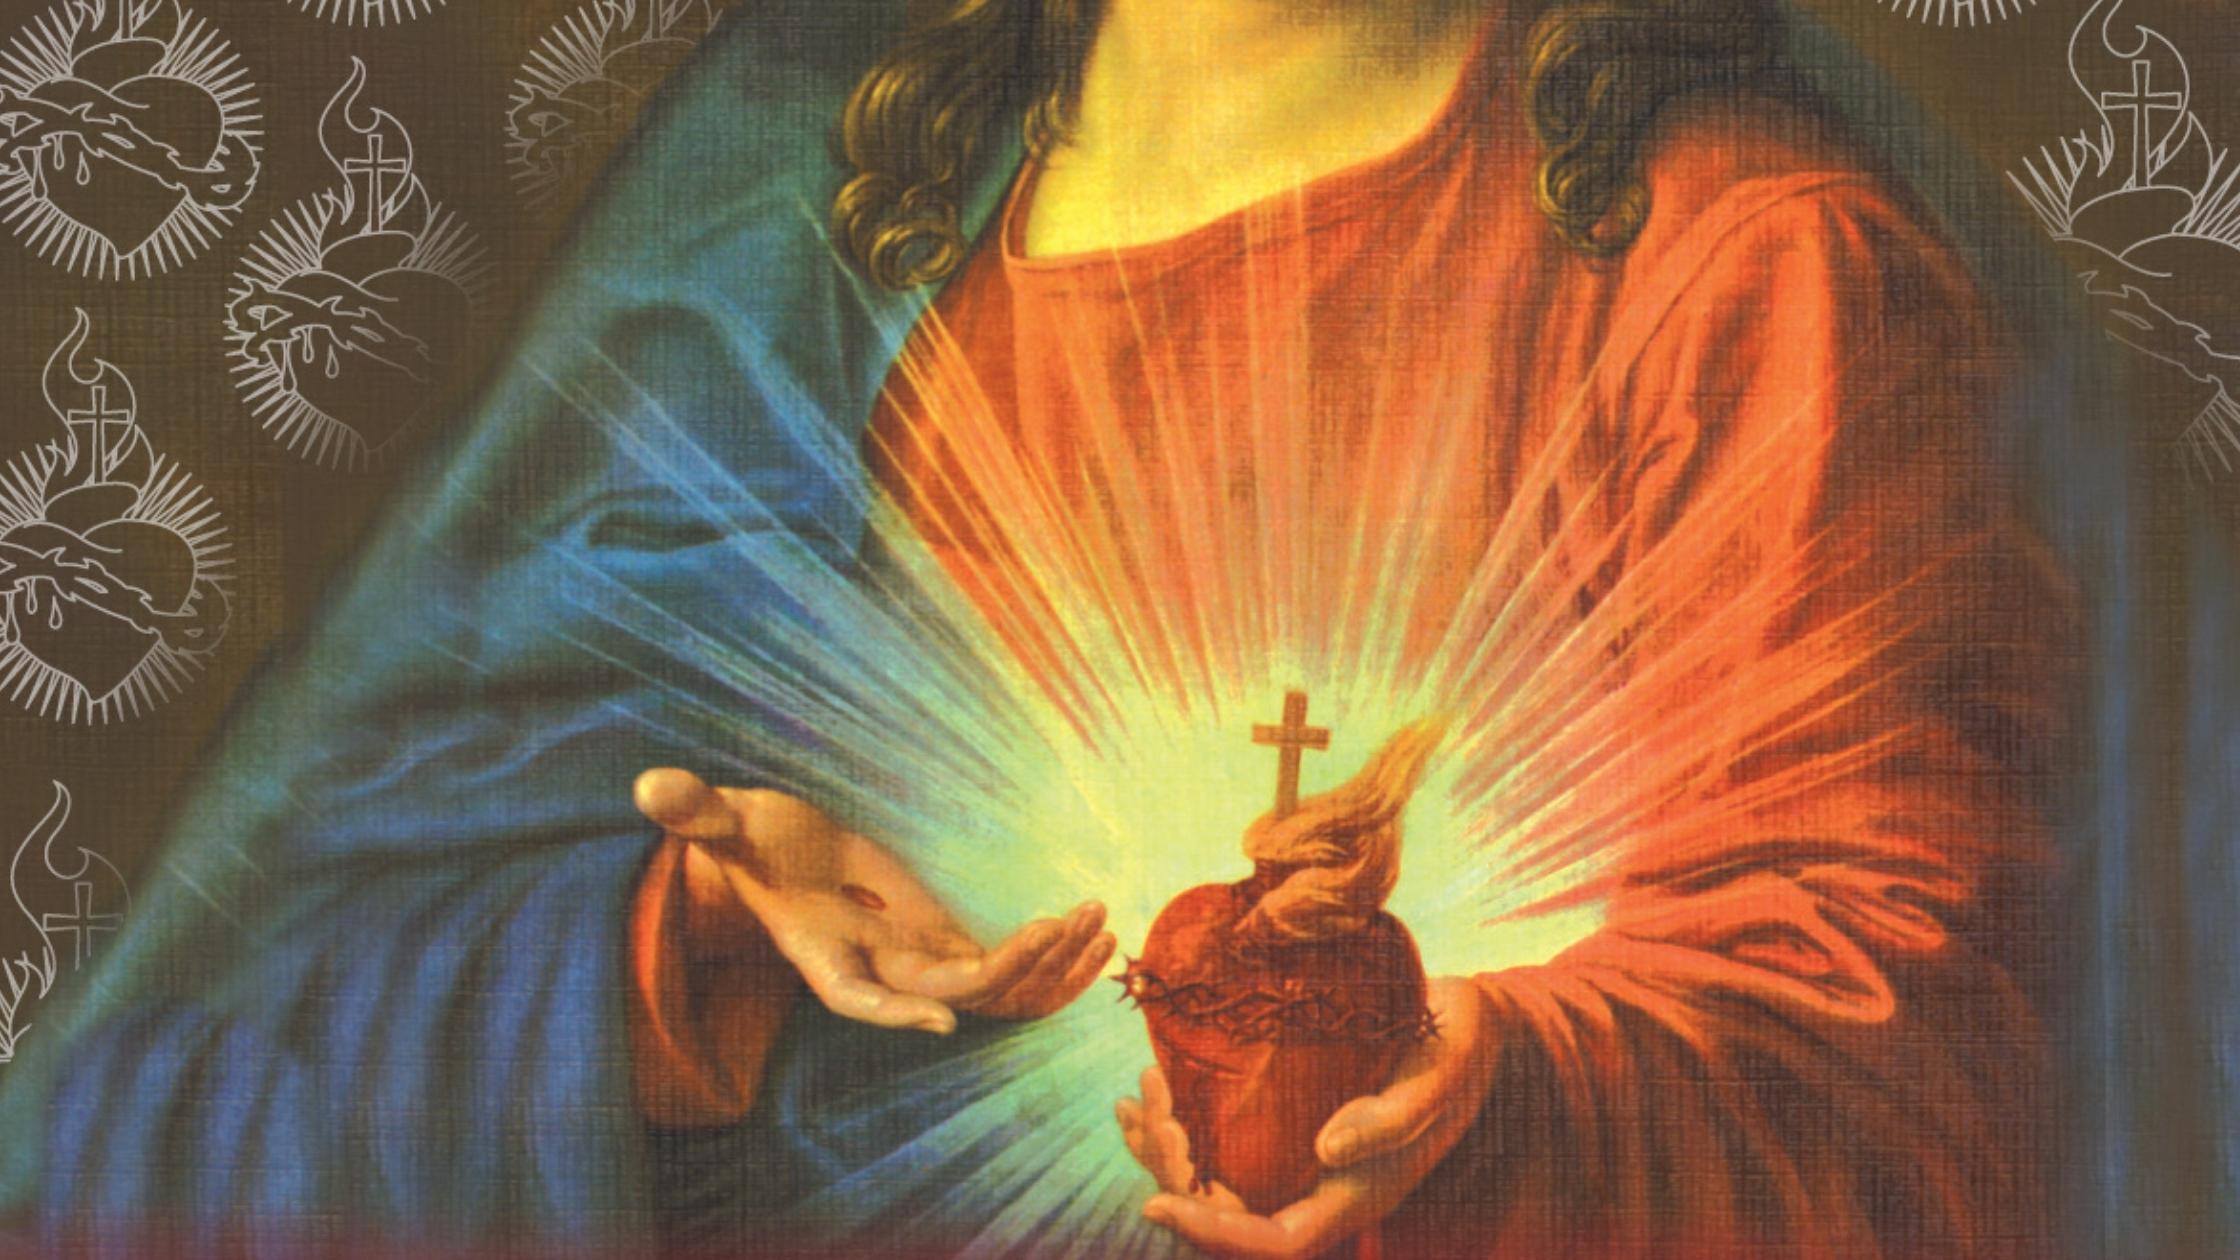 What is the Significance of the Sacred Heart of Jesus and the